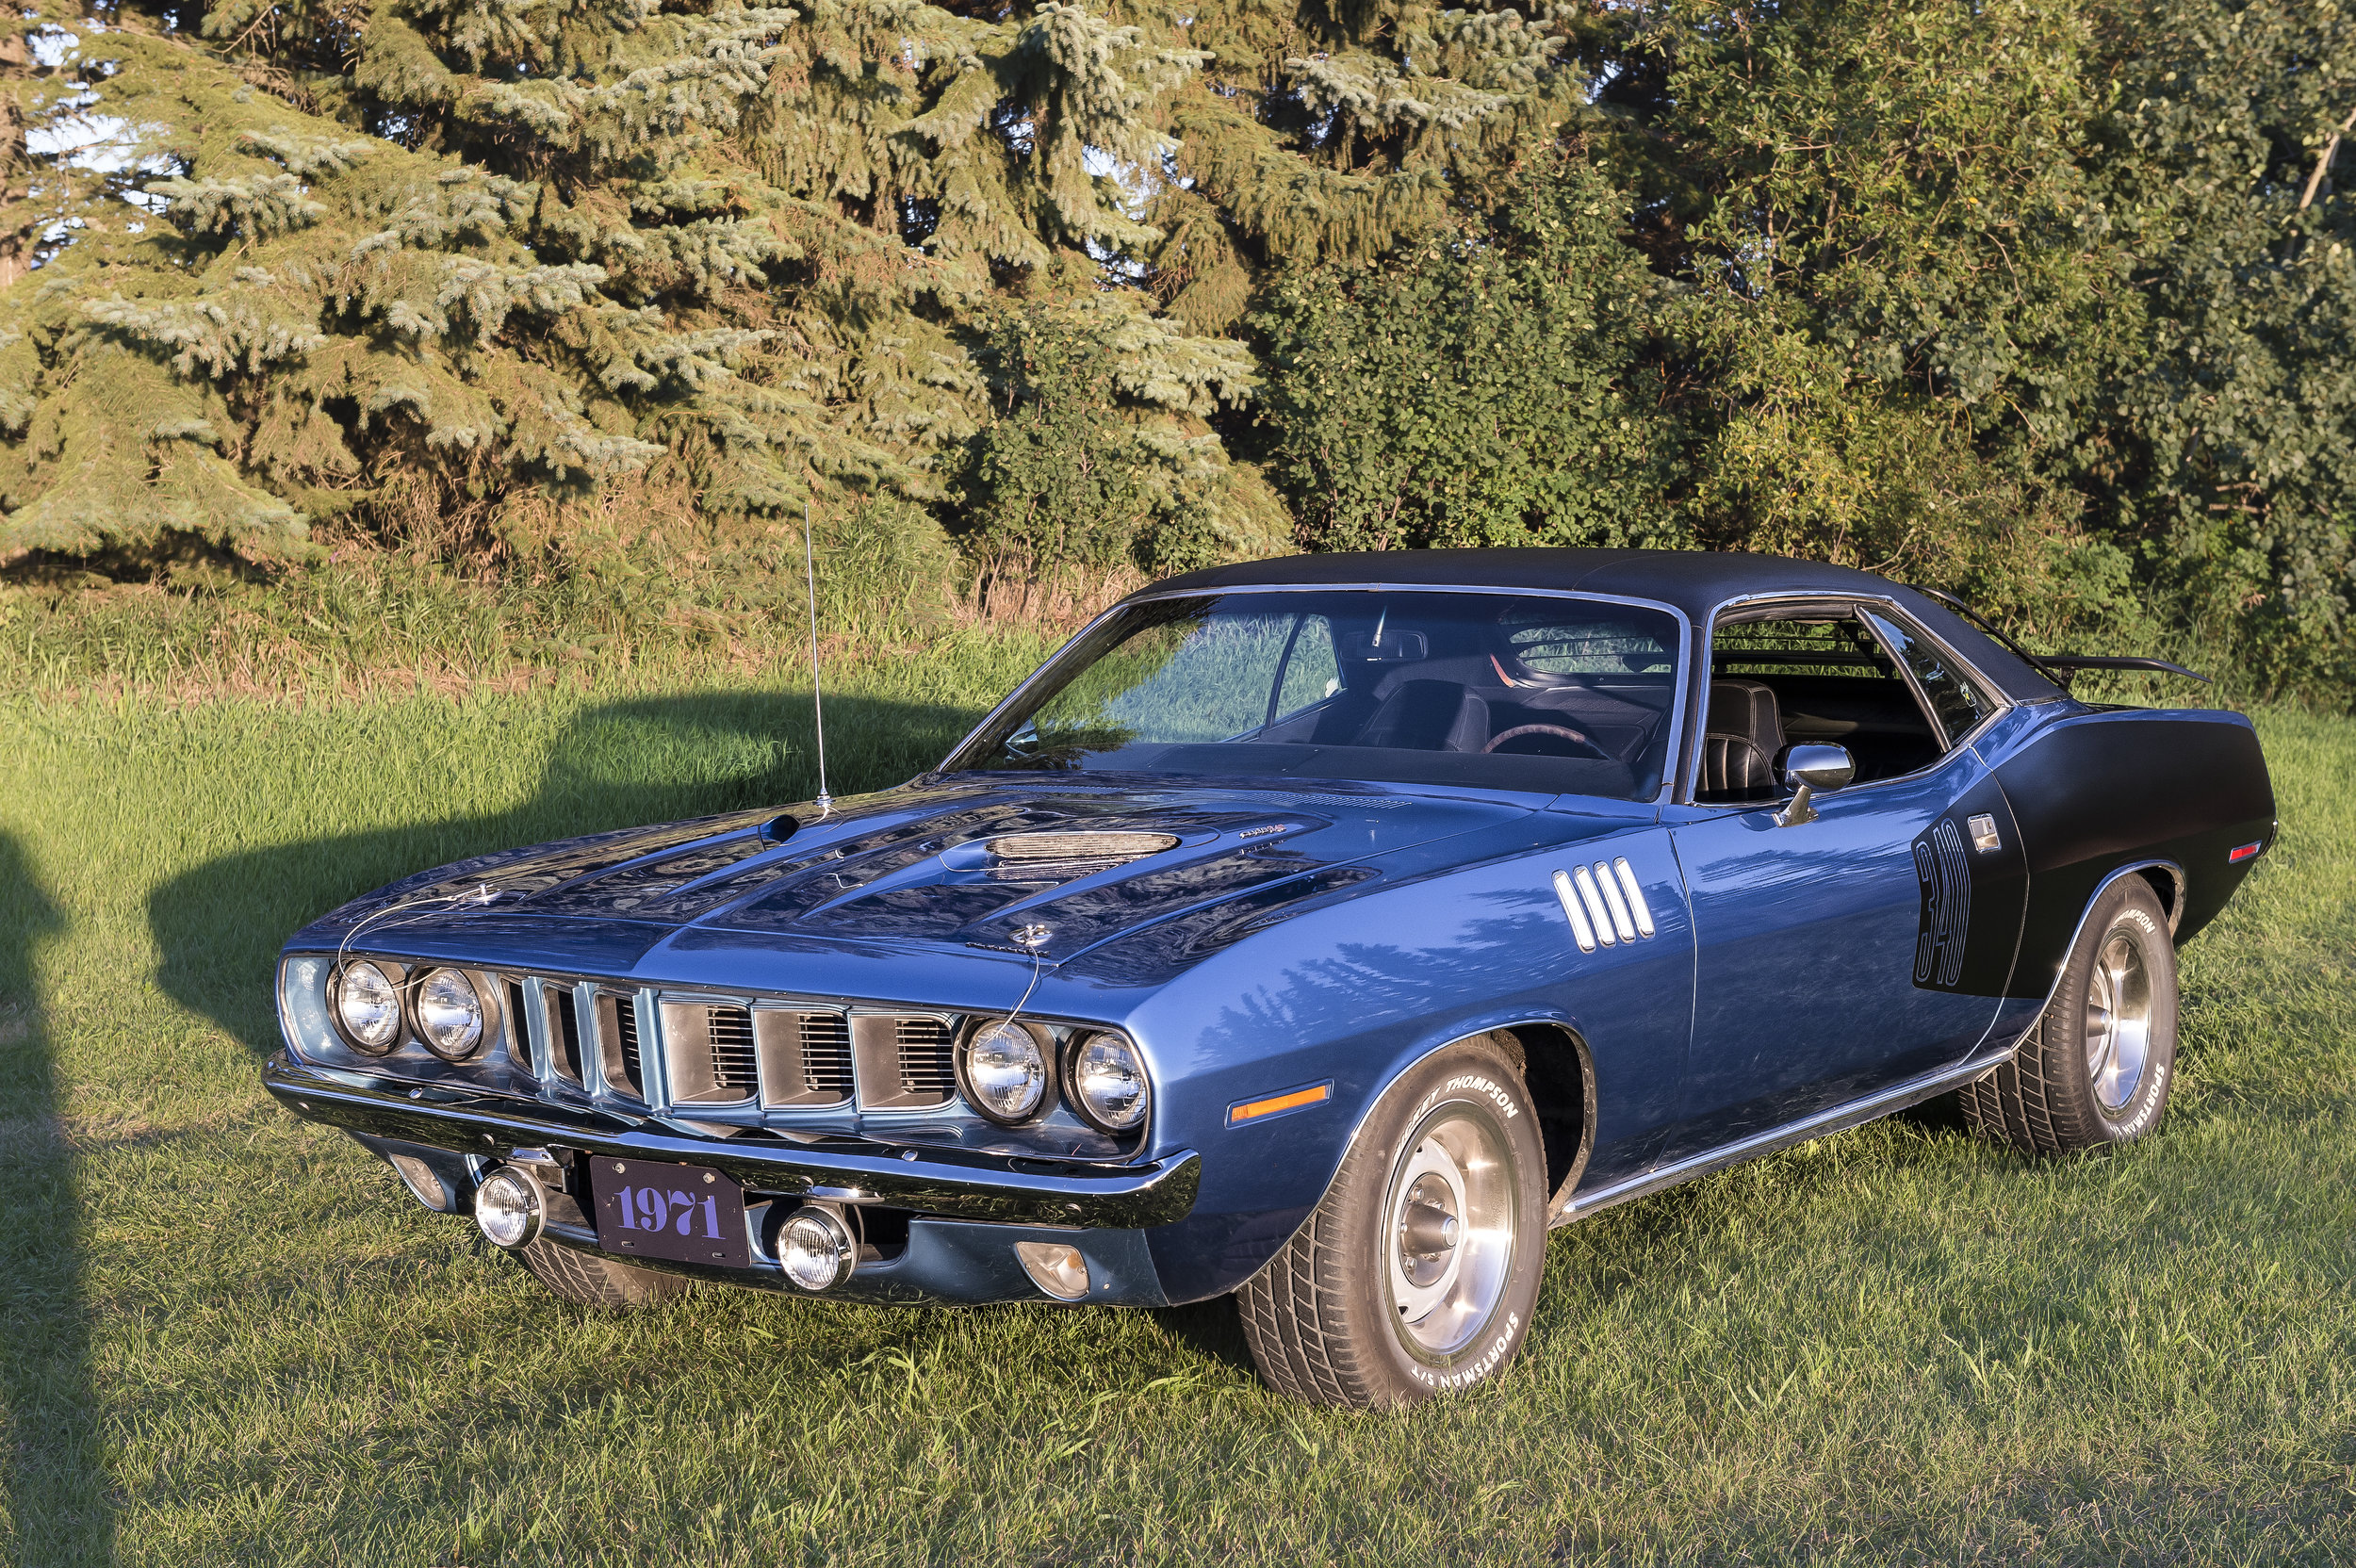    
  
  
&nbsp;  
&nbsp;  
&nbsp;  
&nbsp;  
&nbsp;  
&nbsp;  
&nbsp;  
&nbsp;  
&nbsp;  
&nbsp;  
&nbsp;  
&nbsp;  
  
  
  
  
  
  
   1971 Plymouth Cuda   340 Engine with a 4 speed standard transmission. 8-3/4”Rear Diff.&nbsp;This car is locally